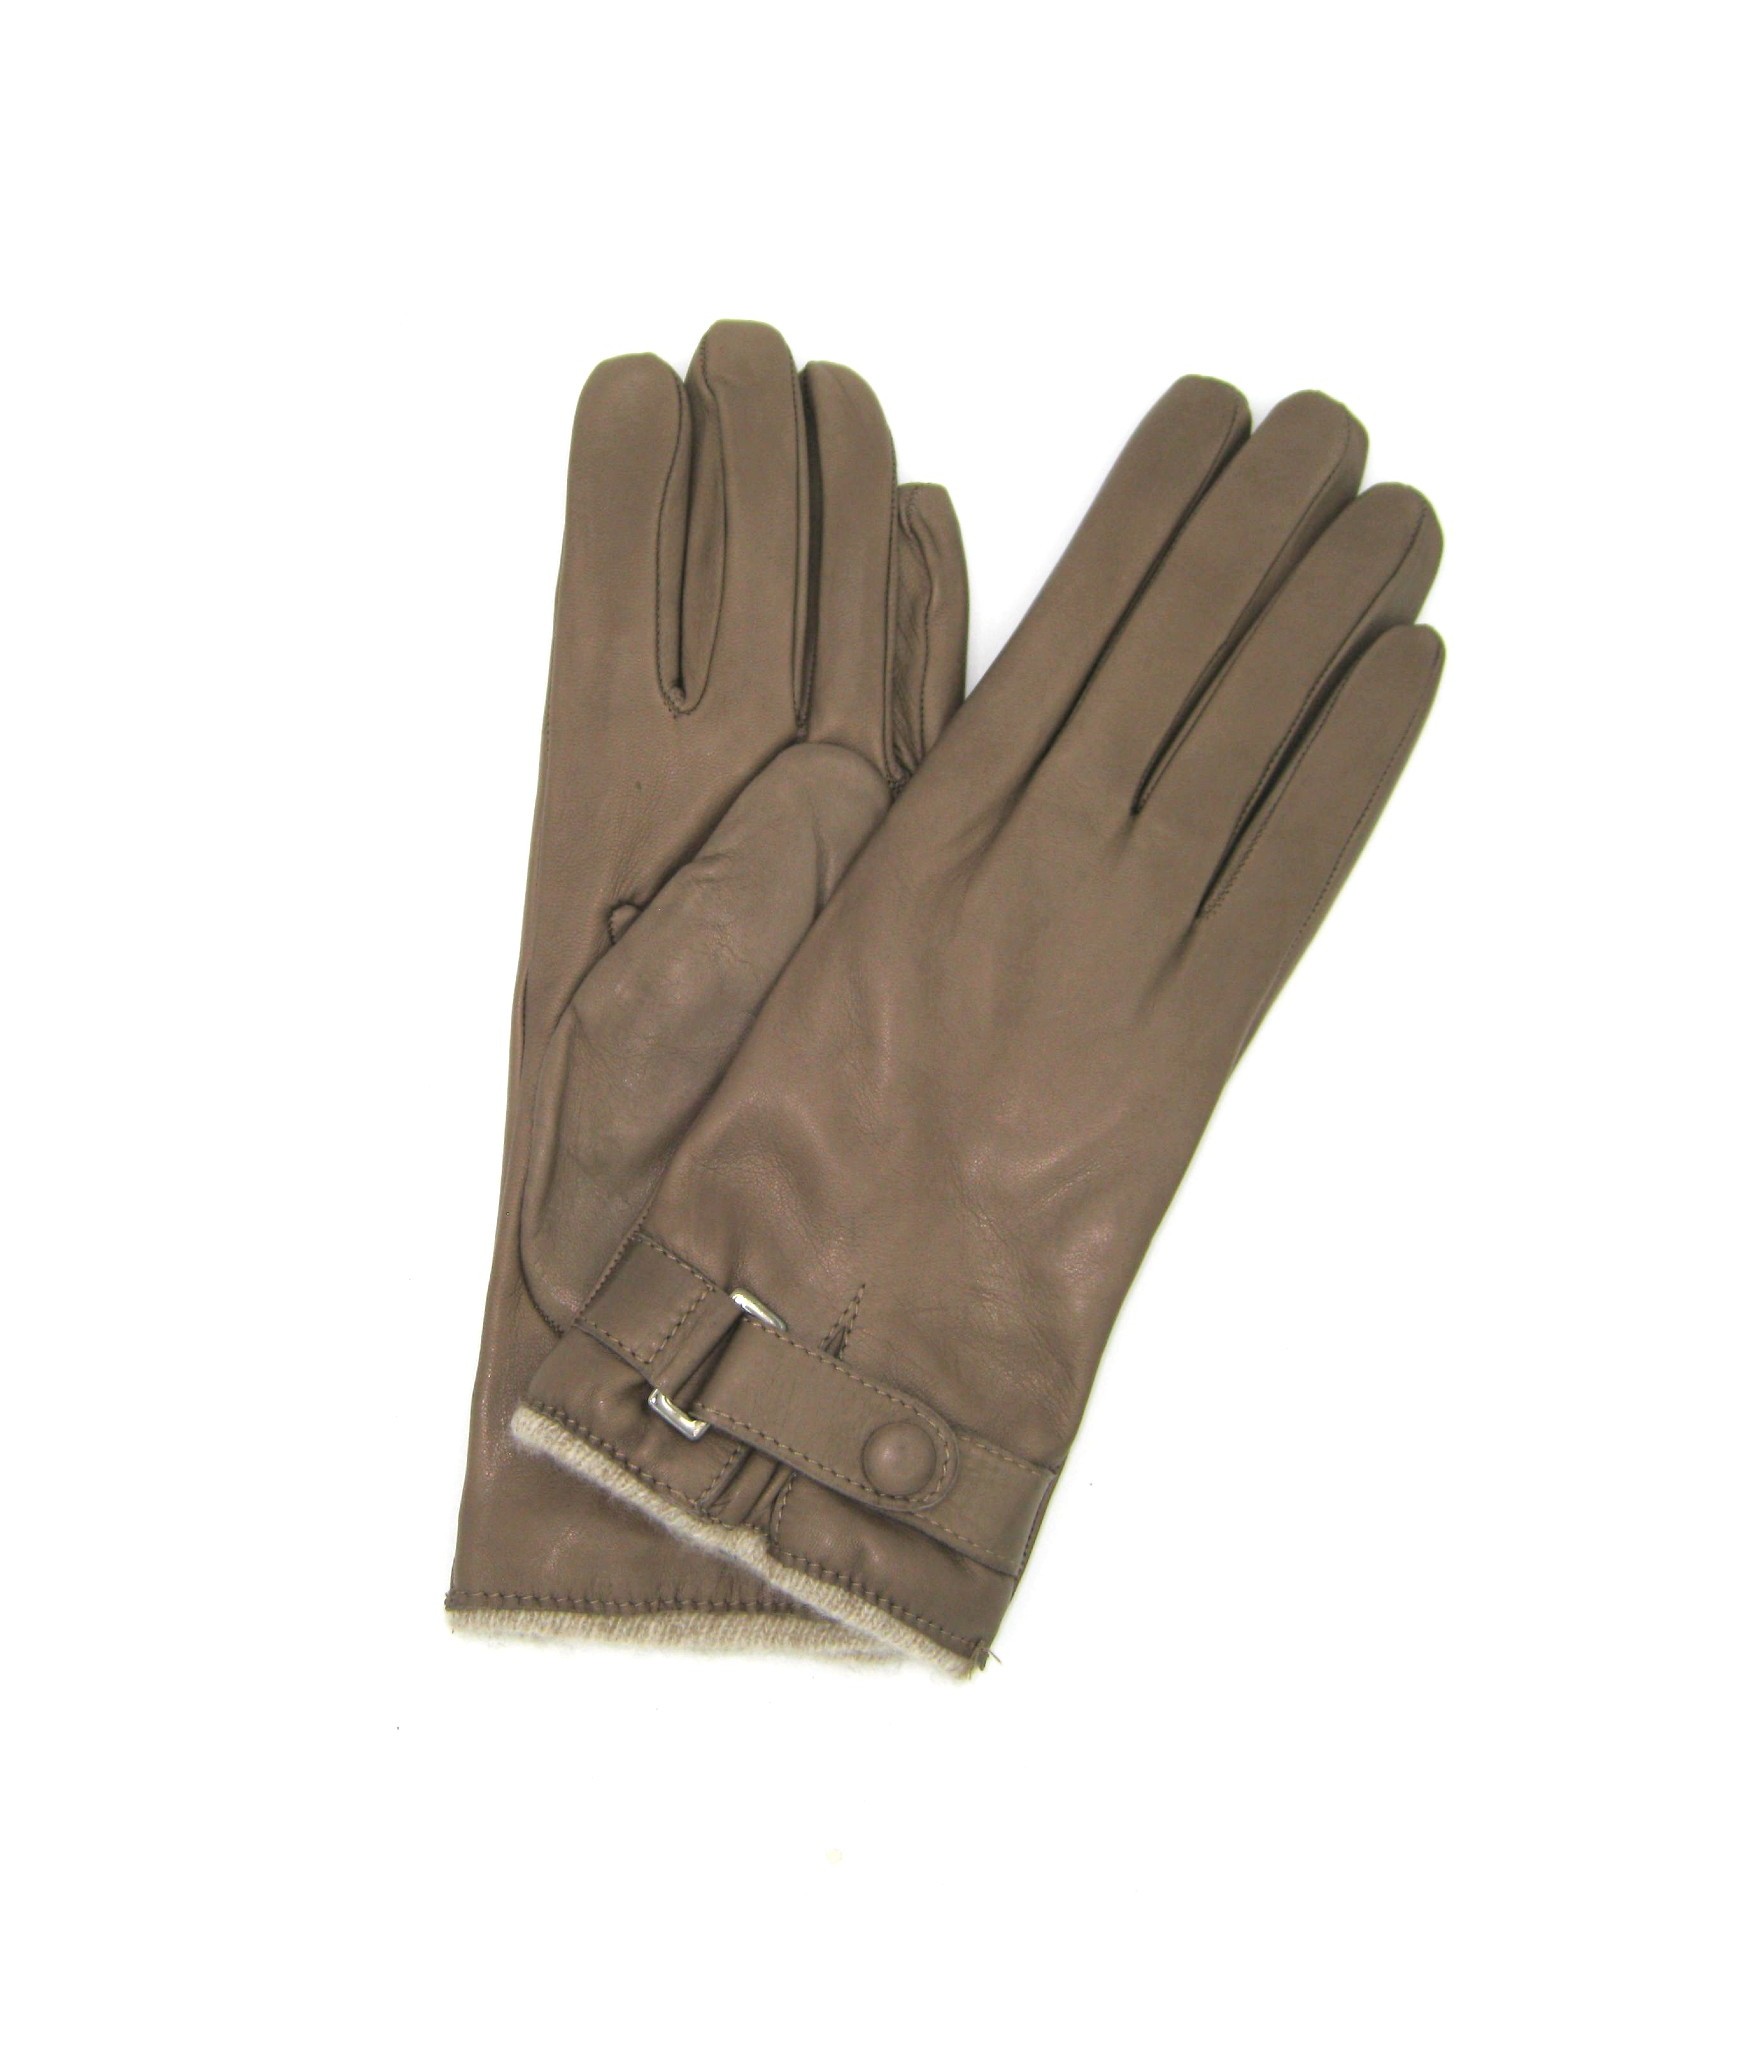 Nappa leather gloves cashmere lined with strap   Mud